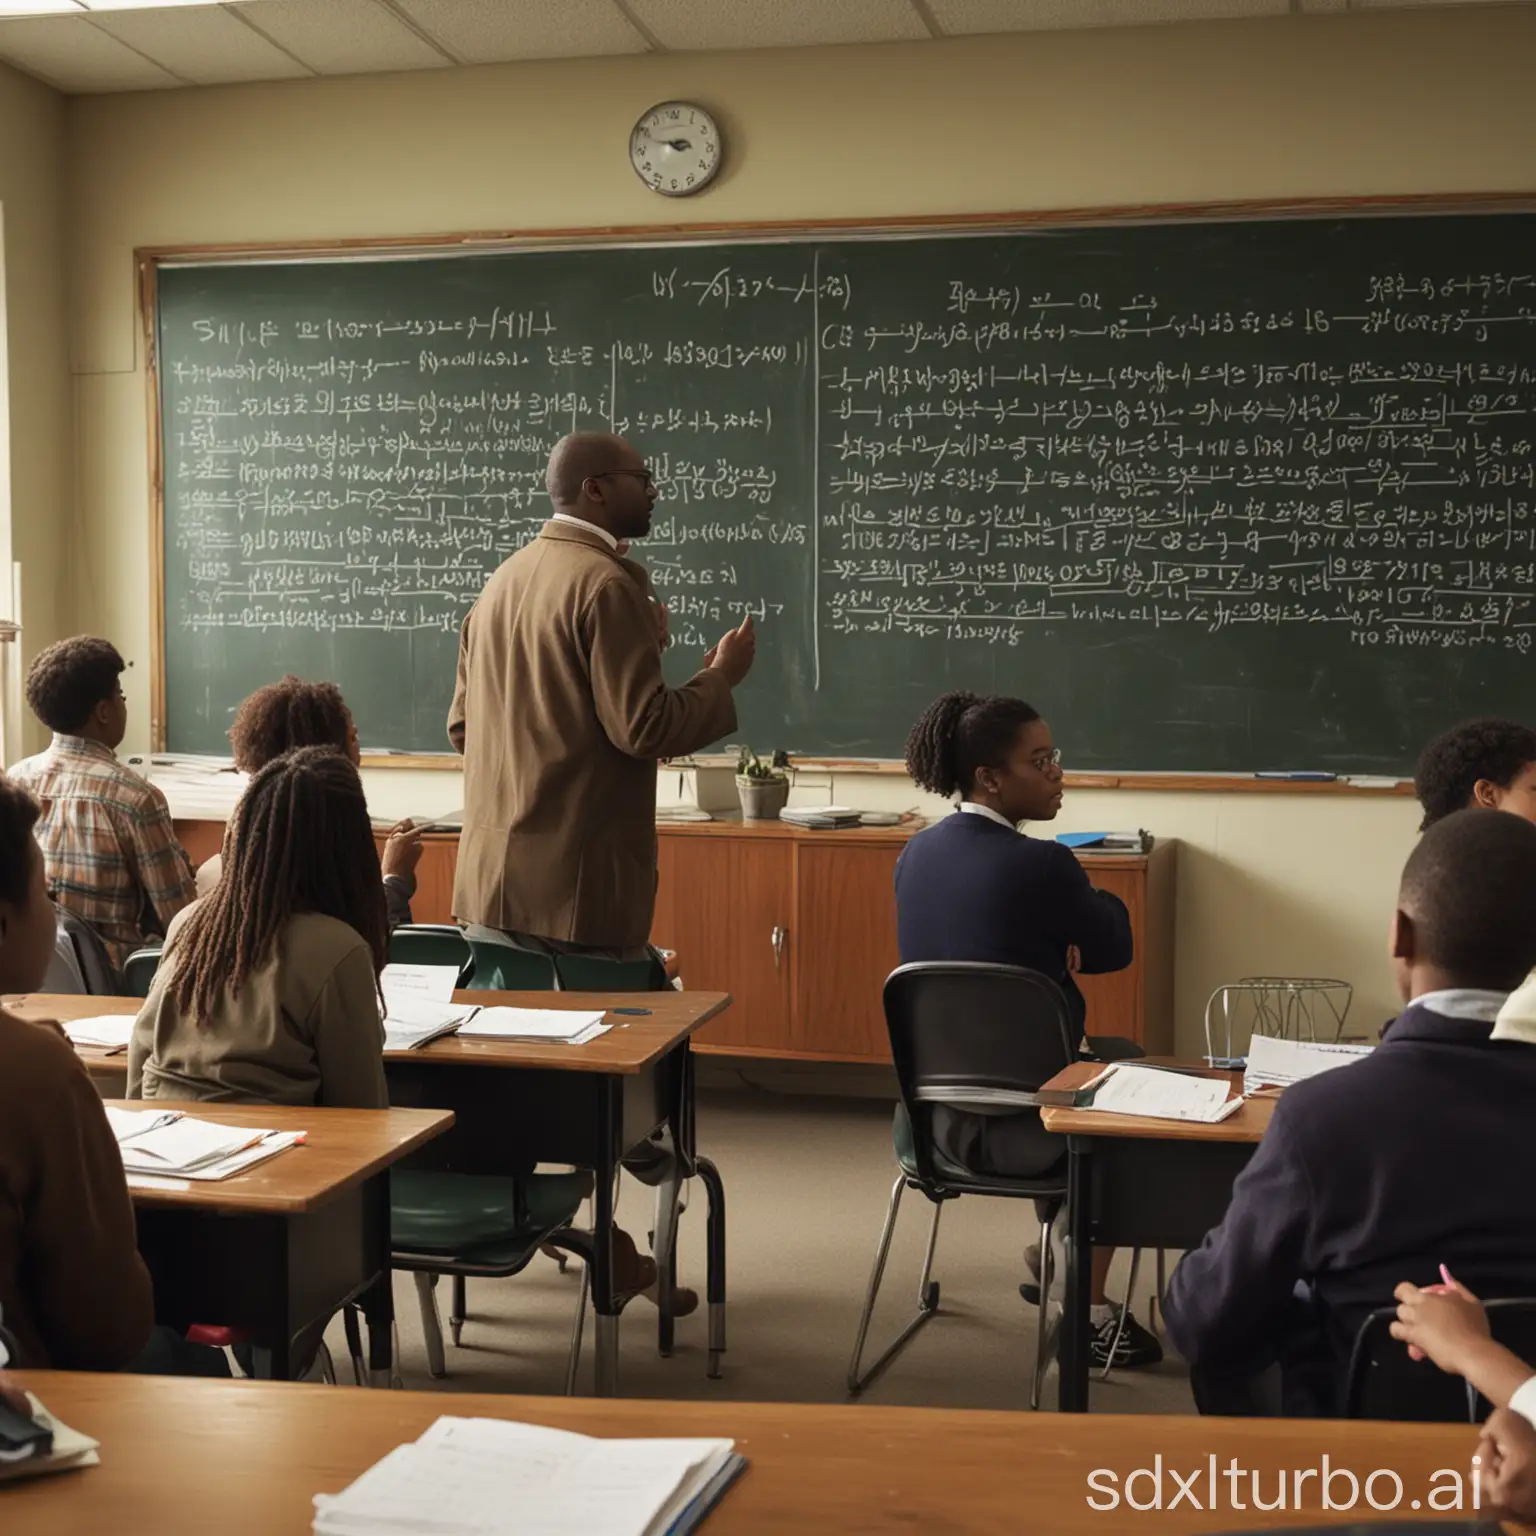 A group of diverse people studying in a classroom. The people are sitting at desks and listening to a professor who is standing at the front of the room. There is a blackboard behind the professor with equations written on it.